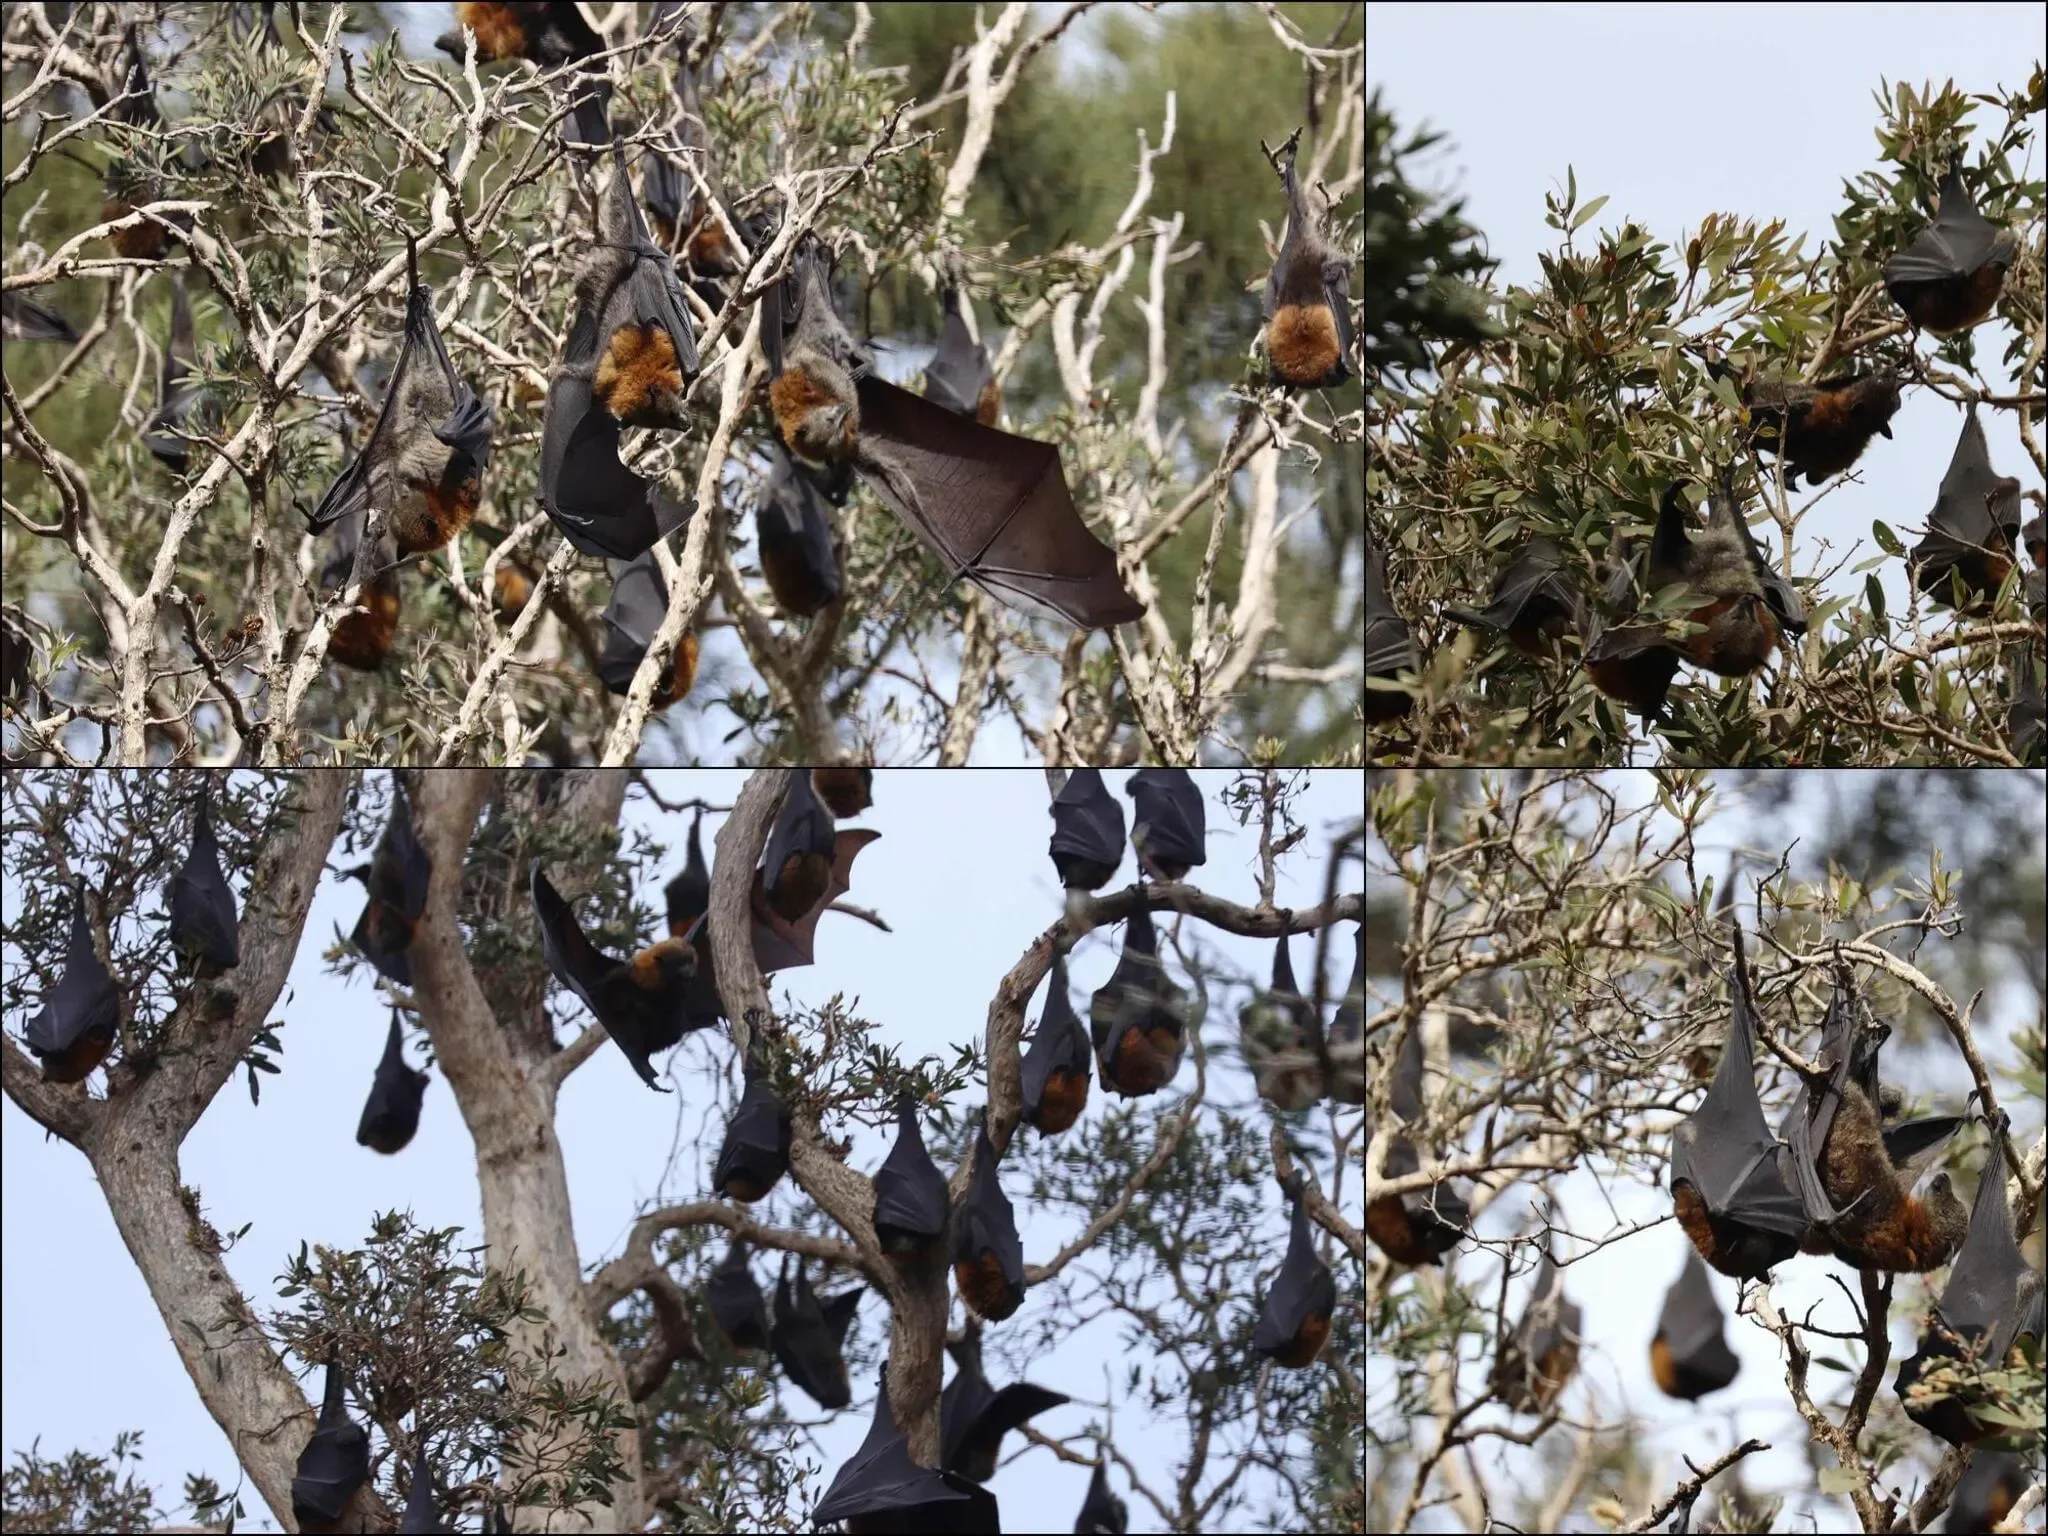 171 photos of Flying Foxes